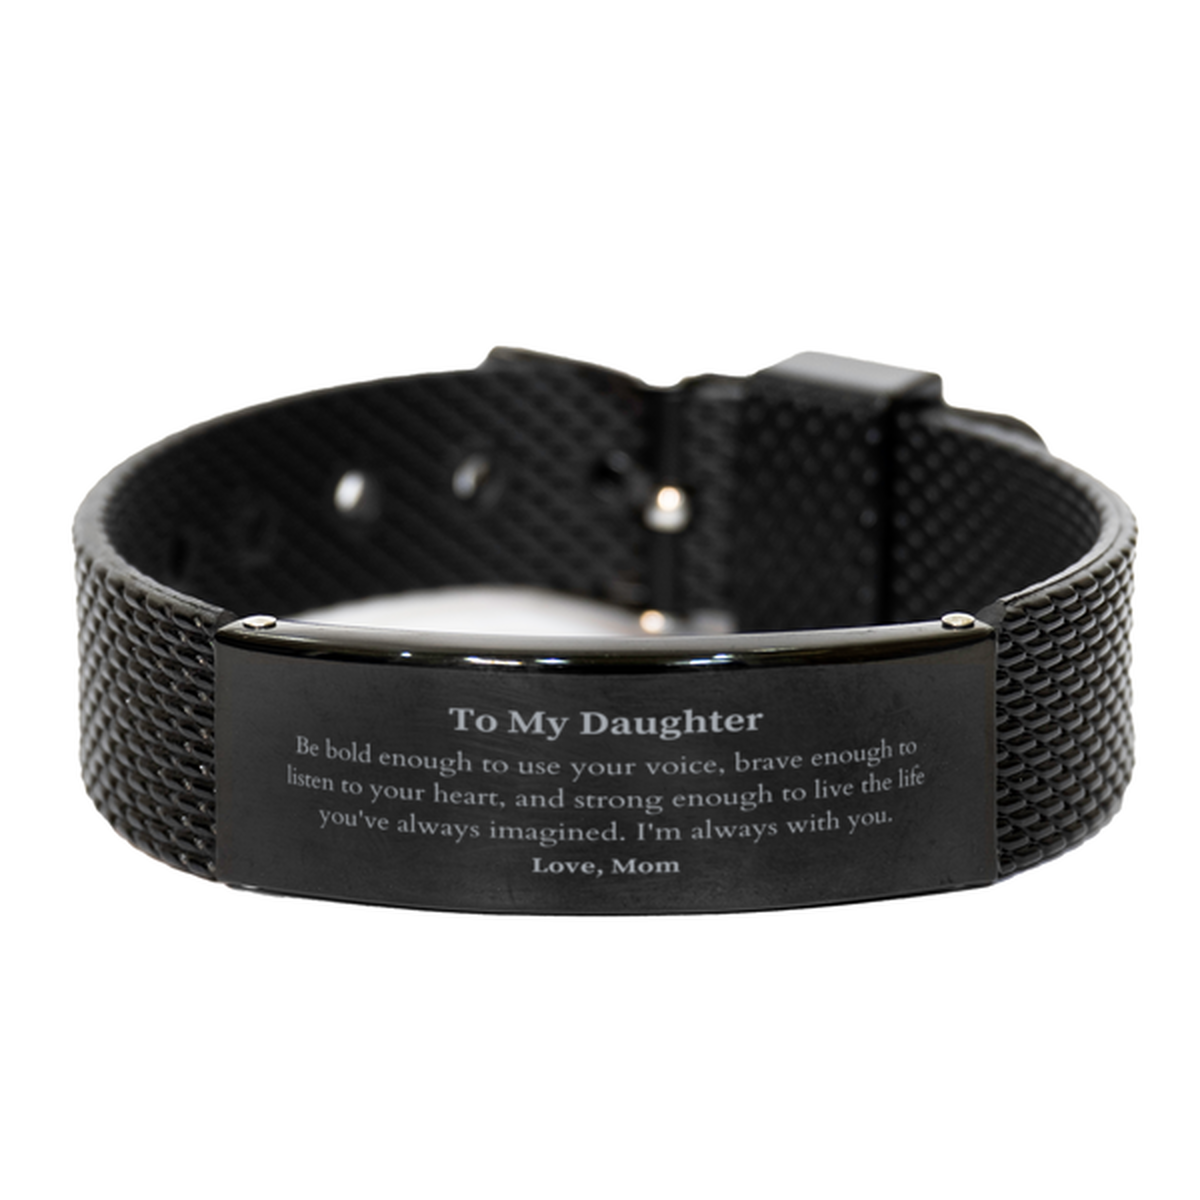 Keepsake Daughter Black Shark Mesh Bracelet Gift Idea Graduation Christmas Birthday Daughter from Mom, Daughter Be bold enough to use your voice, brave enough to listen to your heart. Love, Mom